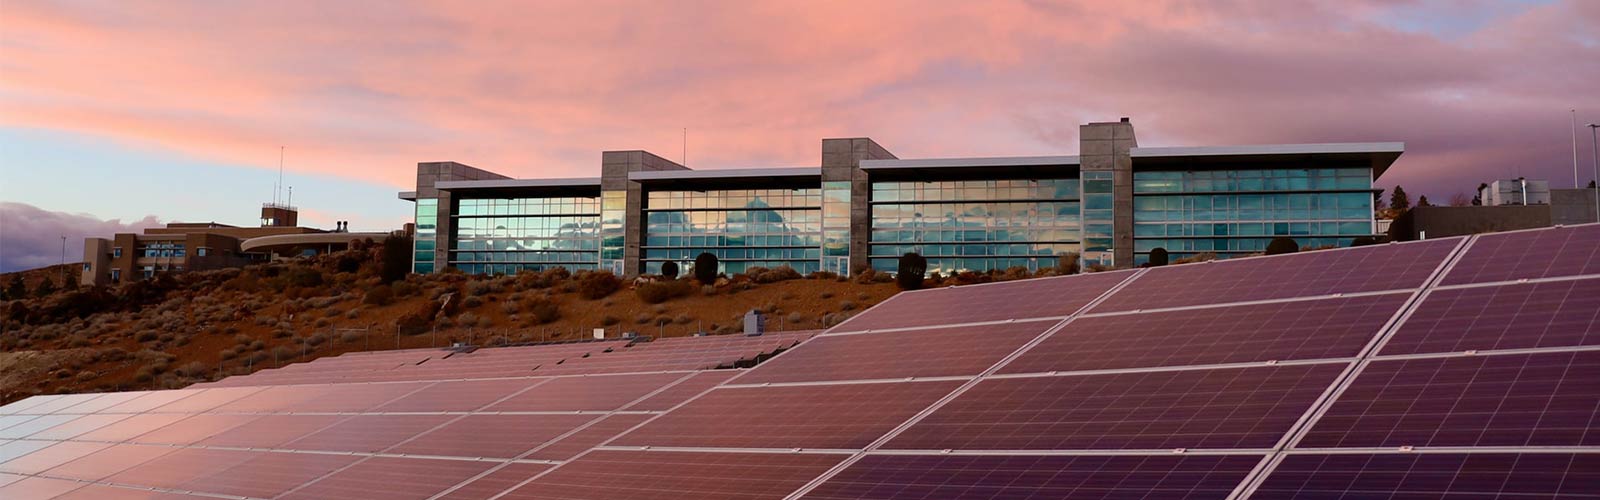 Solar panels in front of campus buildings with a pink sky.